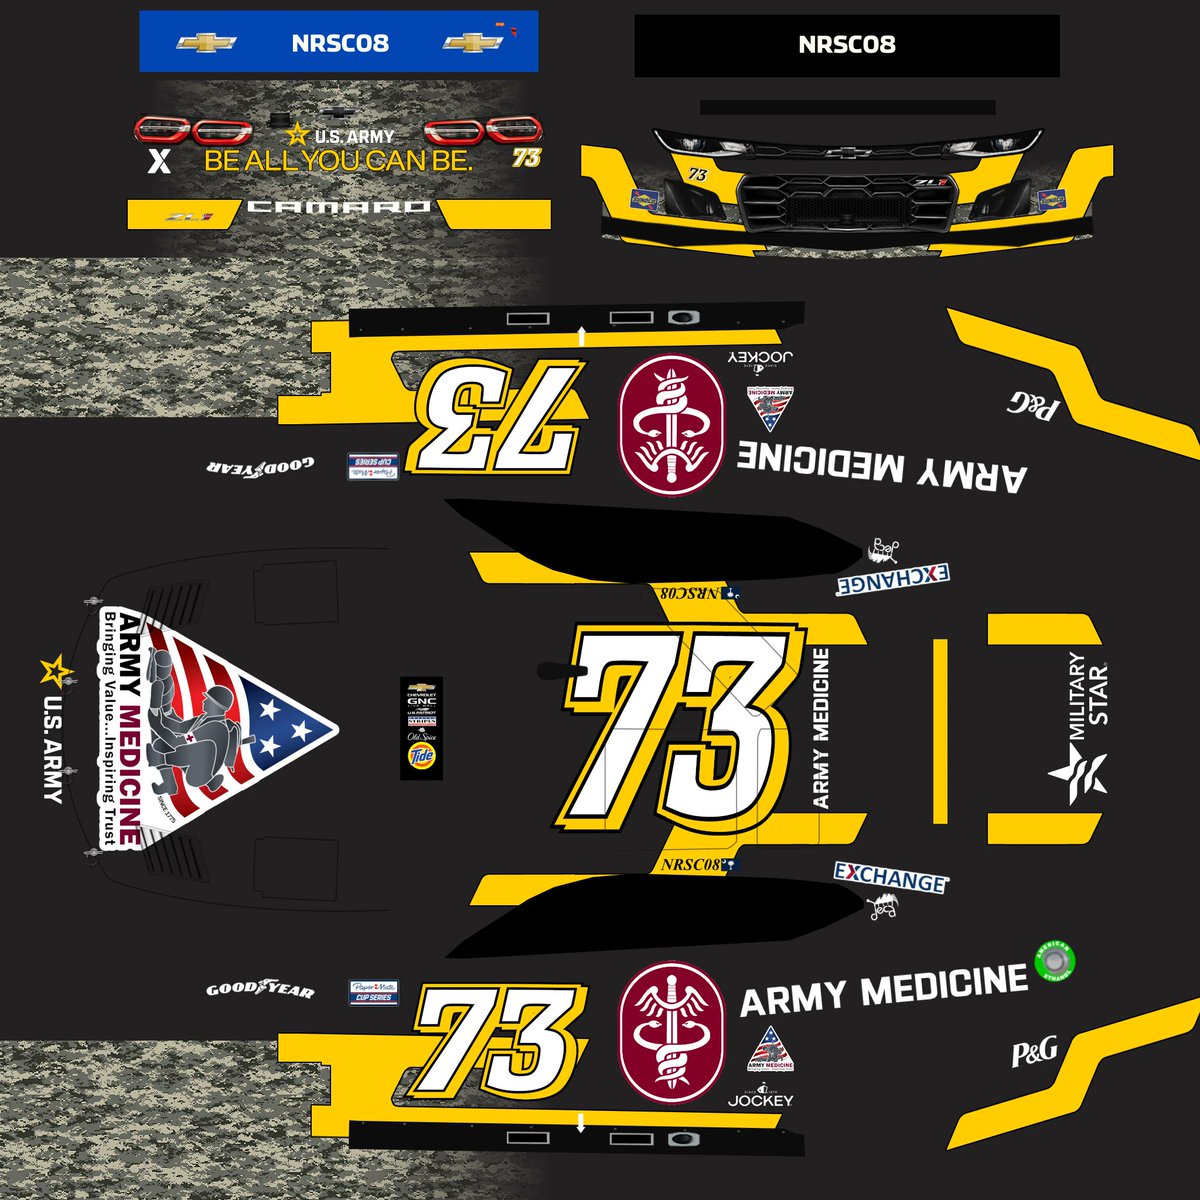 My papermate @USArmy paint schemes and variants #roracing #USArmy #armyreserve #armyrotc #armymedicine